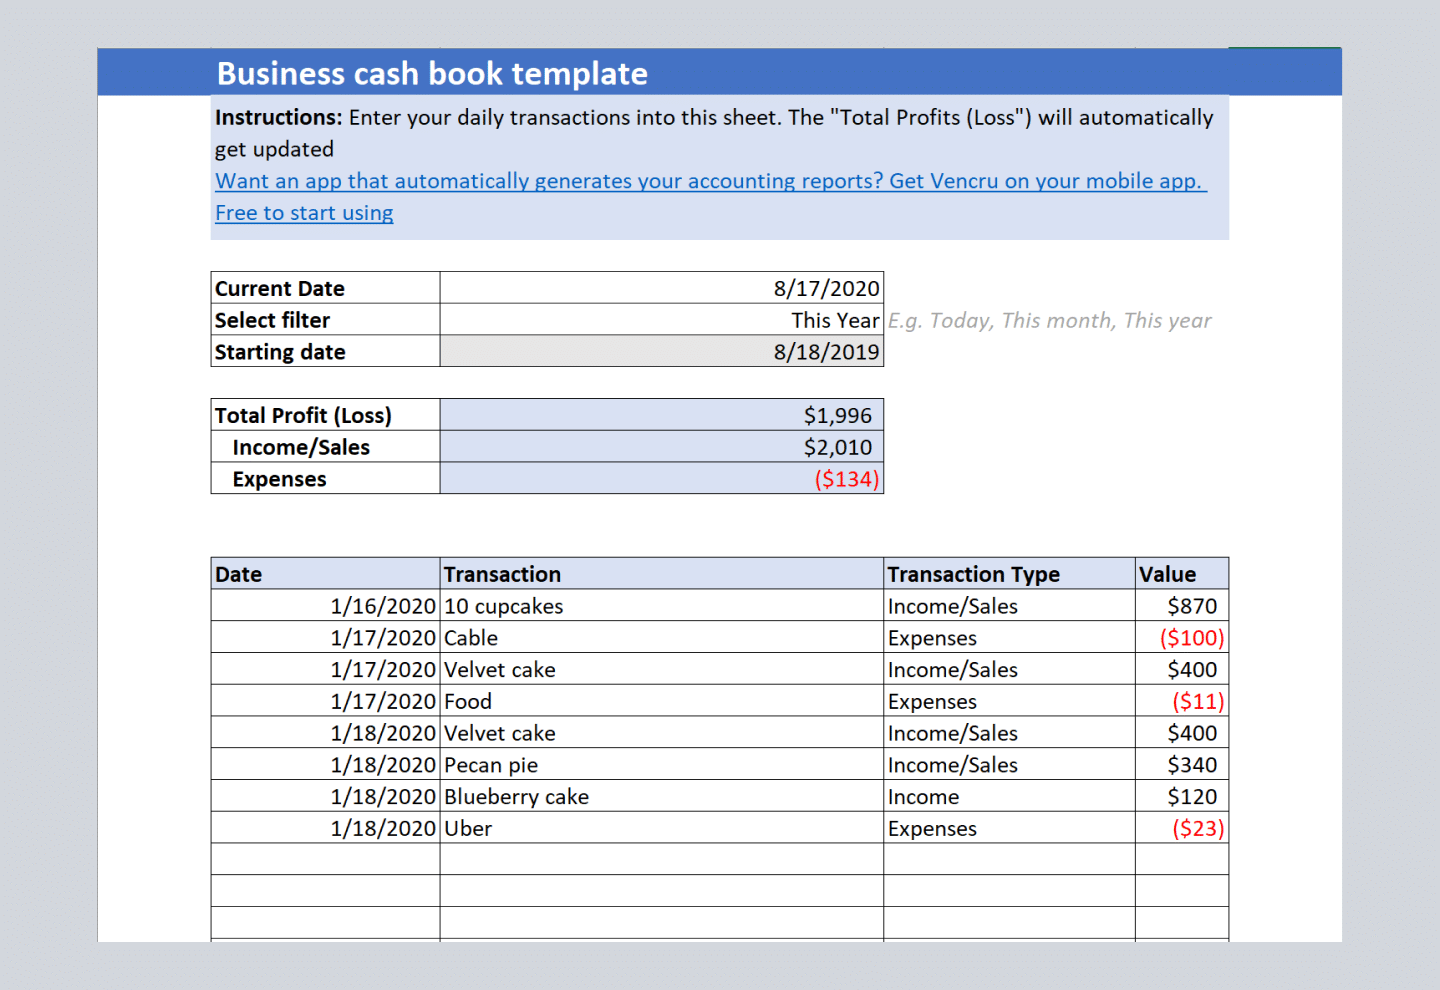 Excel cashbook template Download and edit for your business